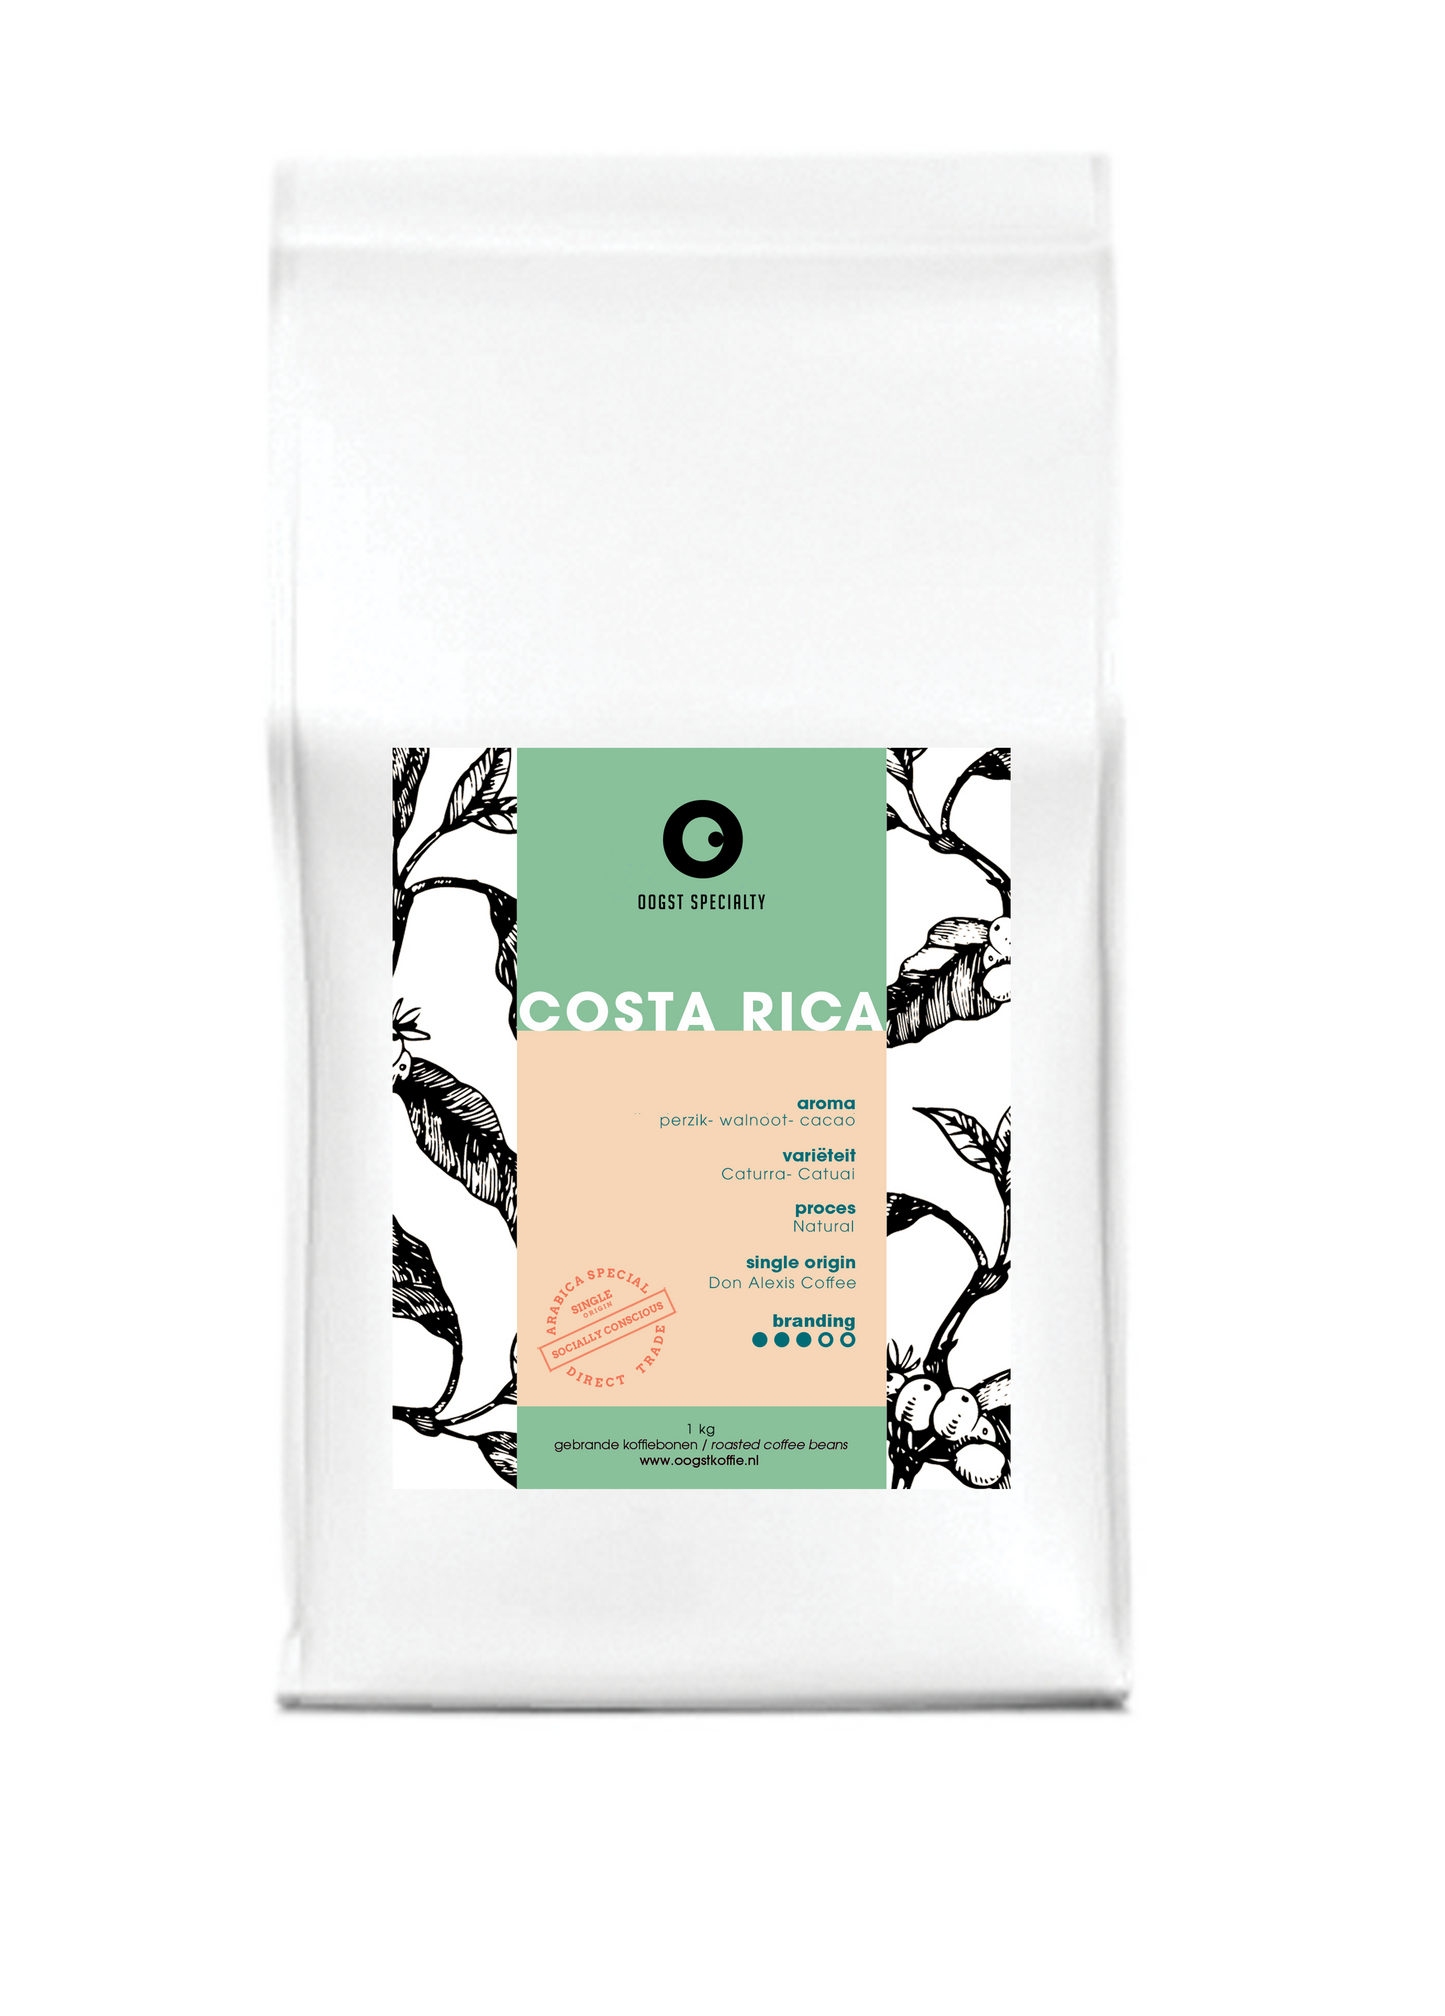 Coffee pack 5 kg. for business 